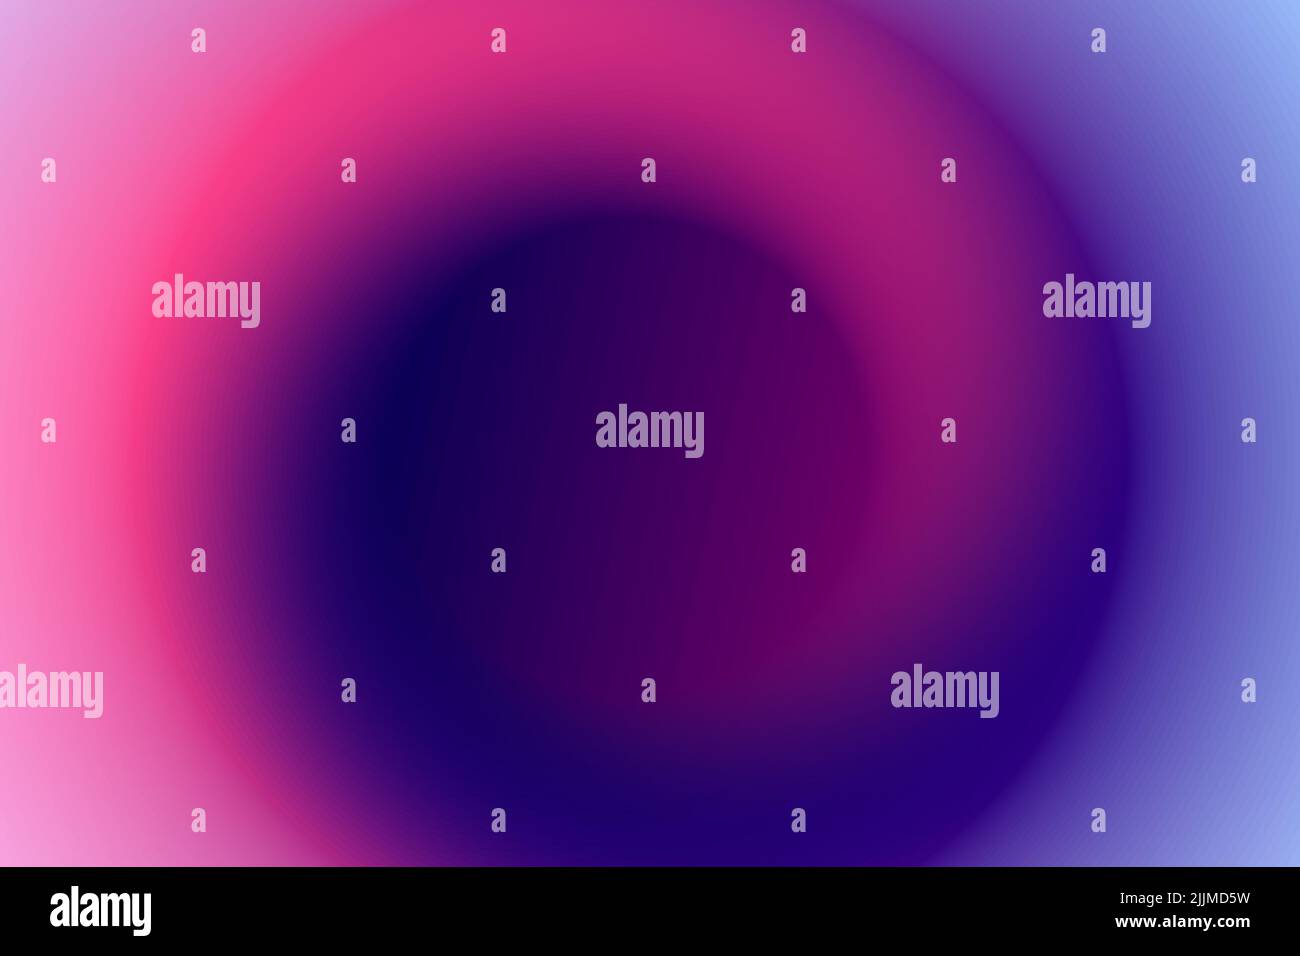 Smooth circular pink and blue gradient mess background Stock Photo